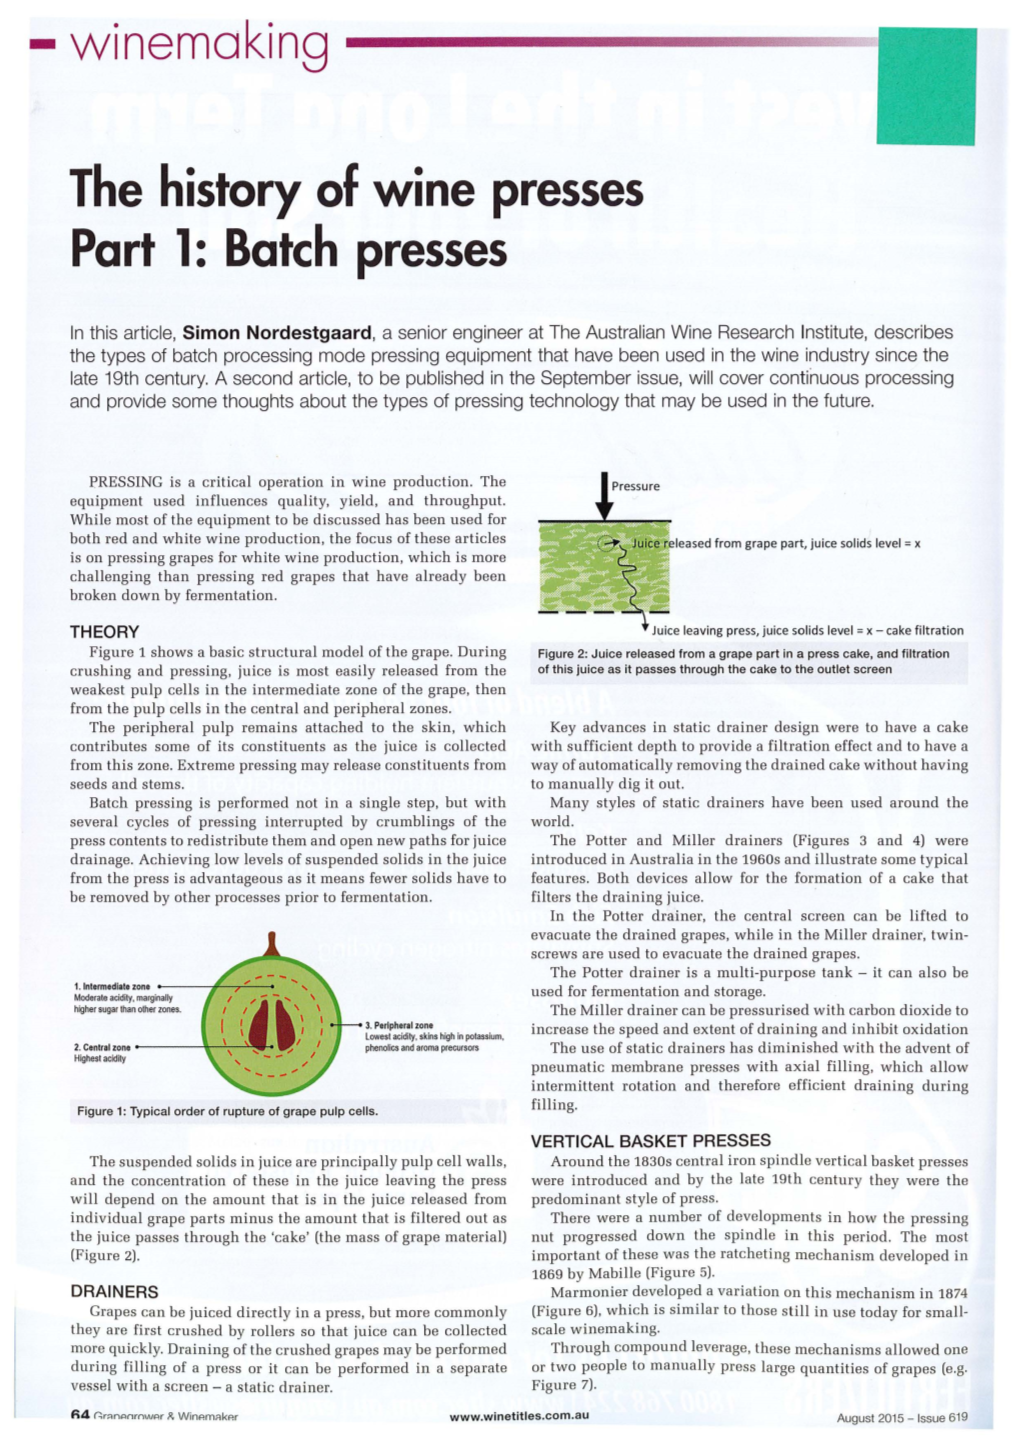 Winemaking the History of Wine Presses Part 1: Batch Presses